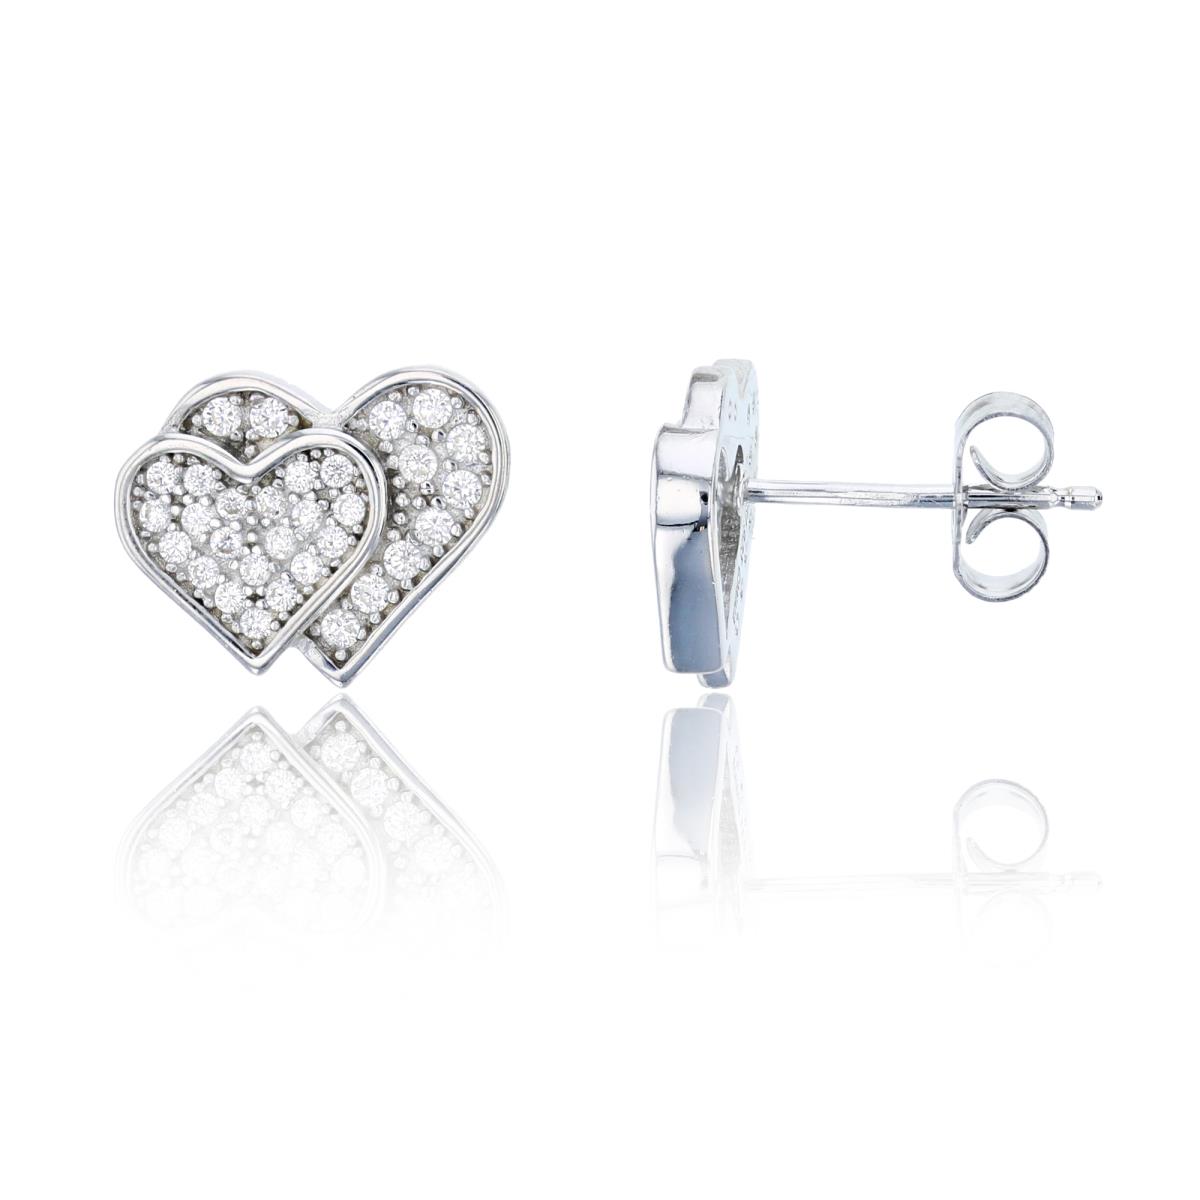 Sterling Silver 13.4x11mm Pave Double Heart Stud